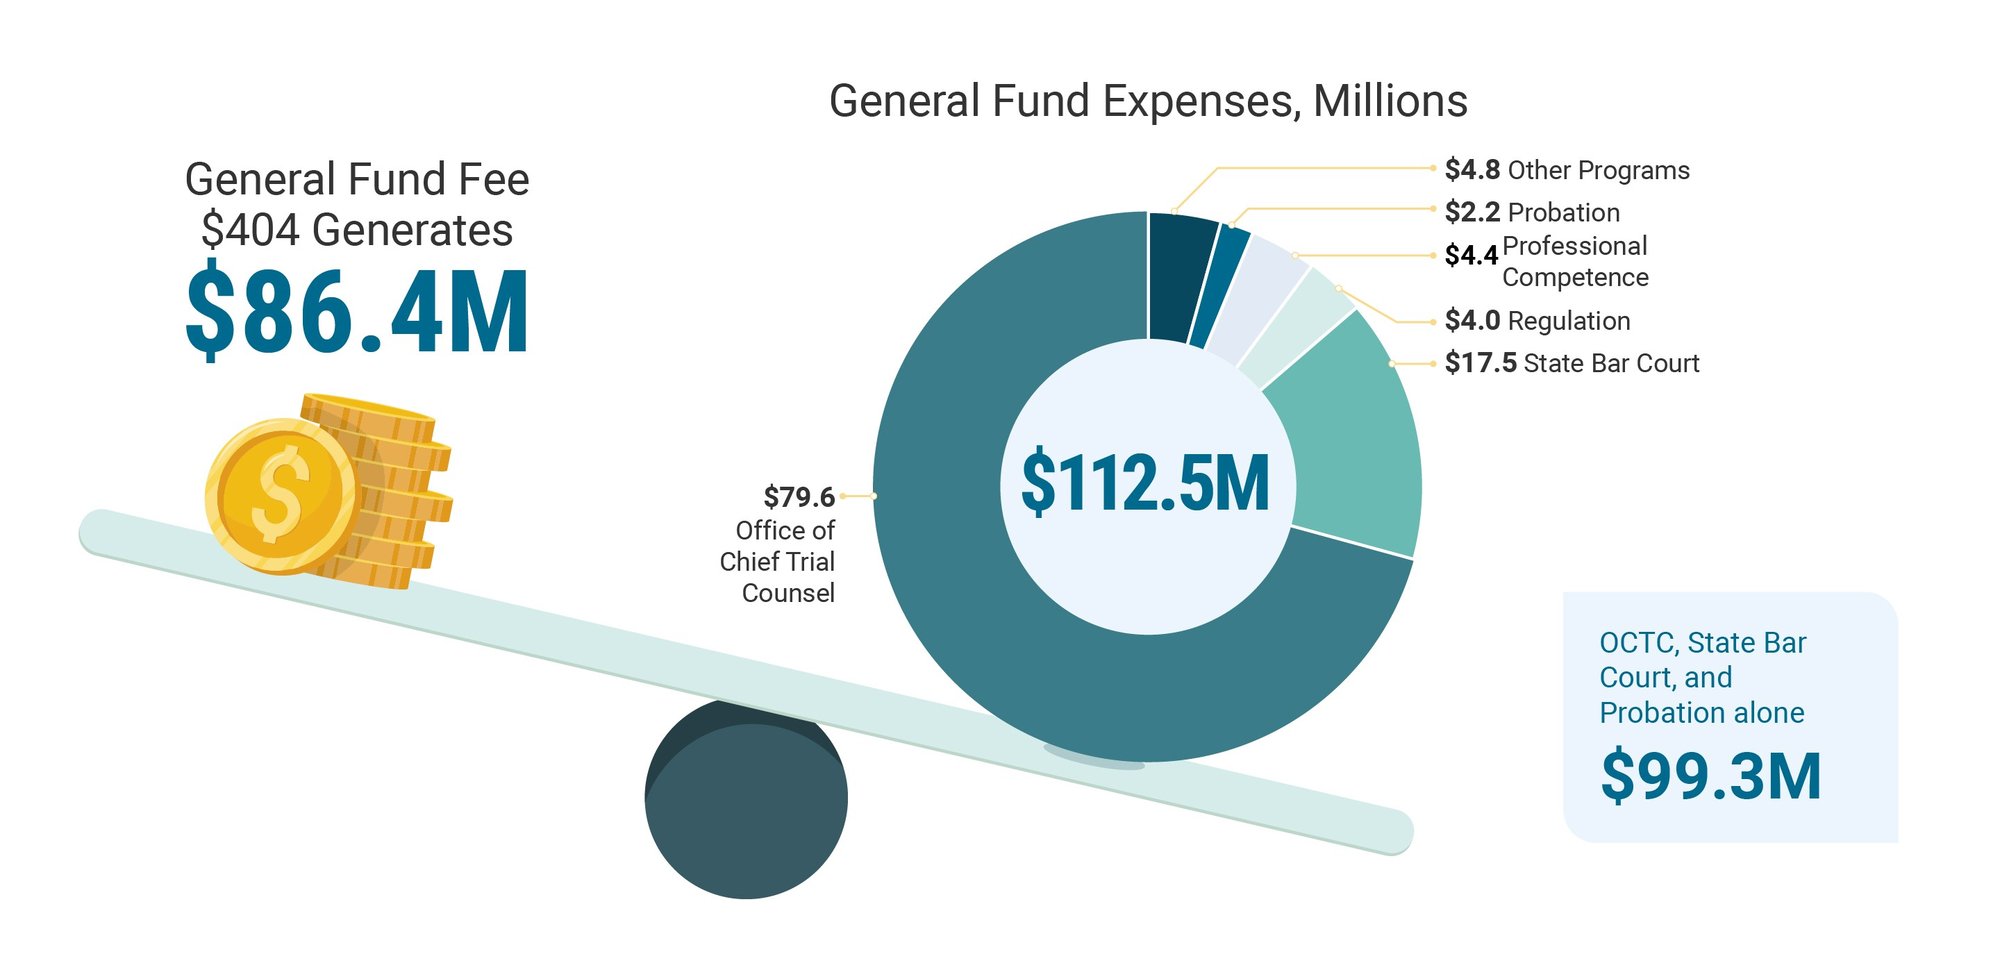 General Fund generates $86.4 million; key elements of the discipline system cost $99.3 million.